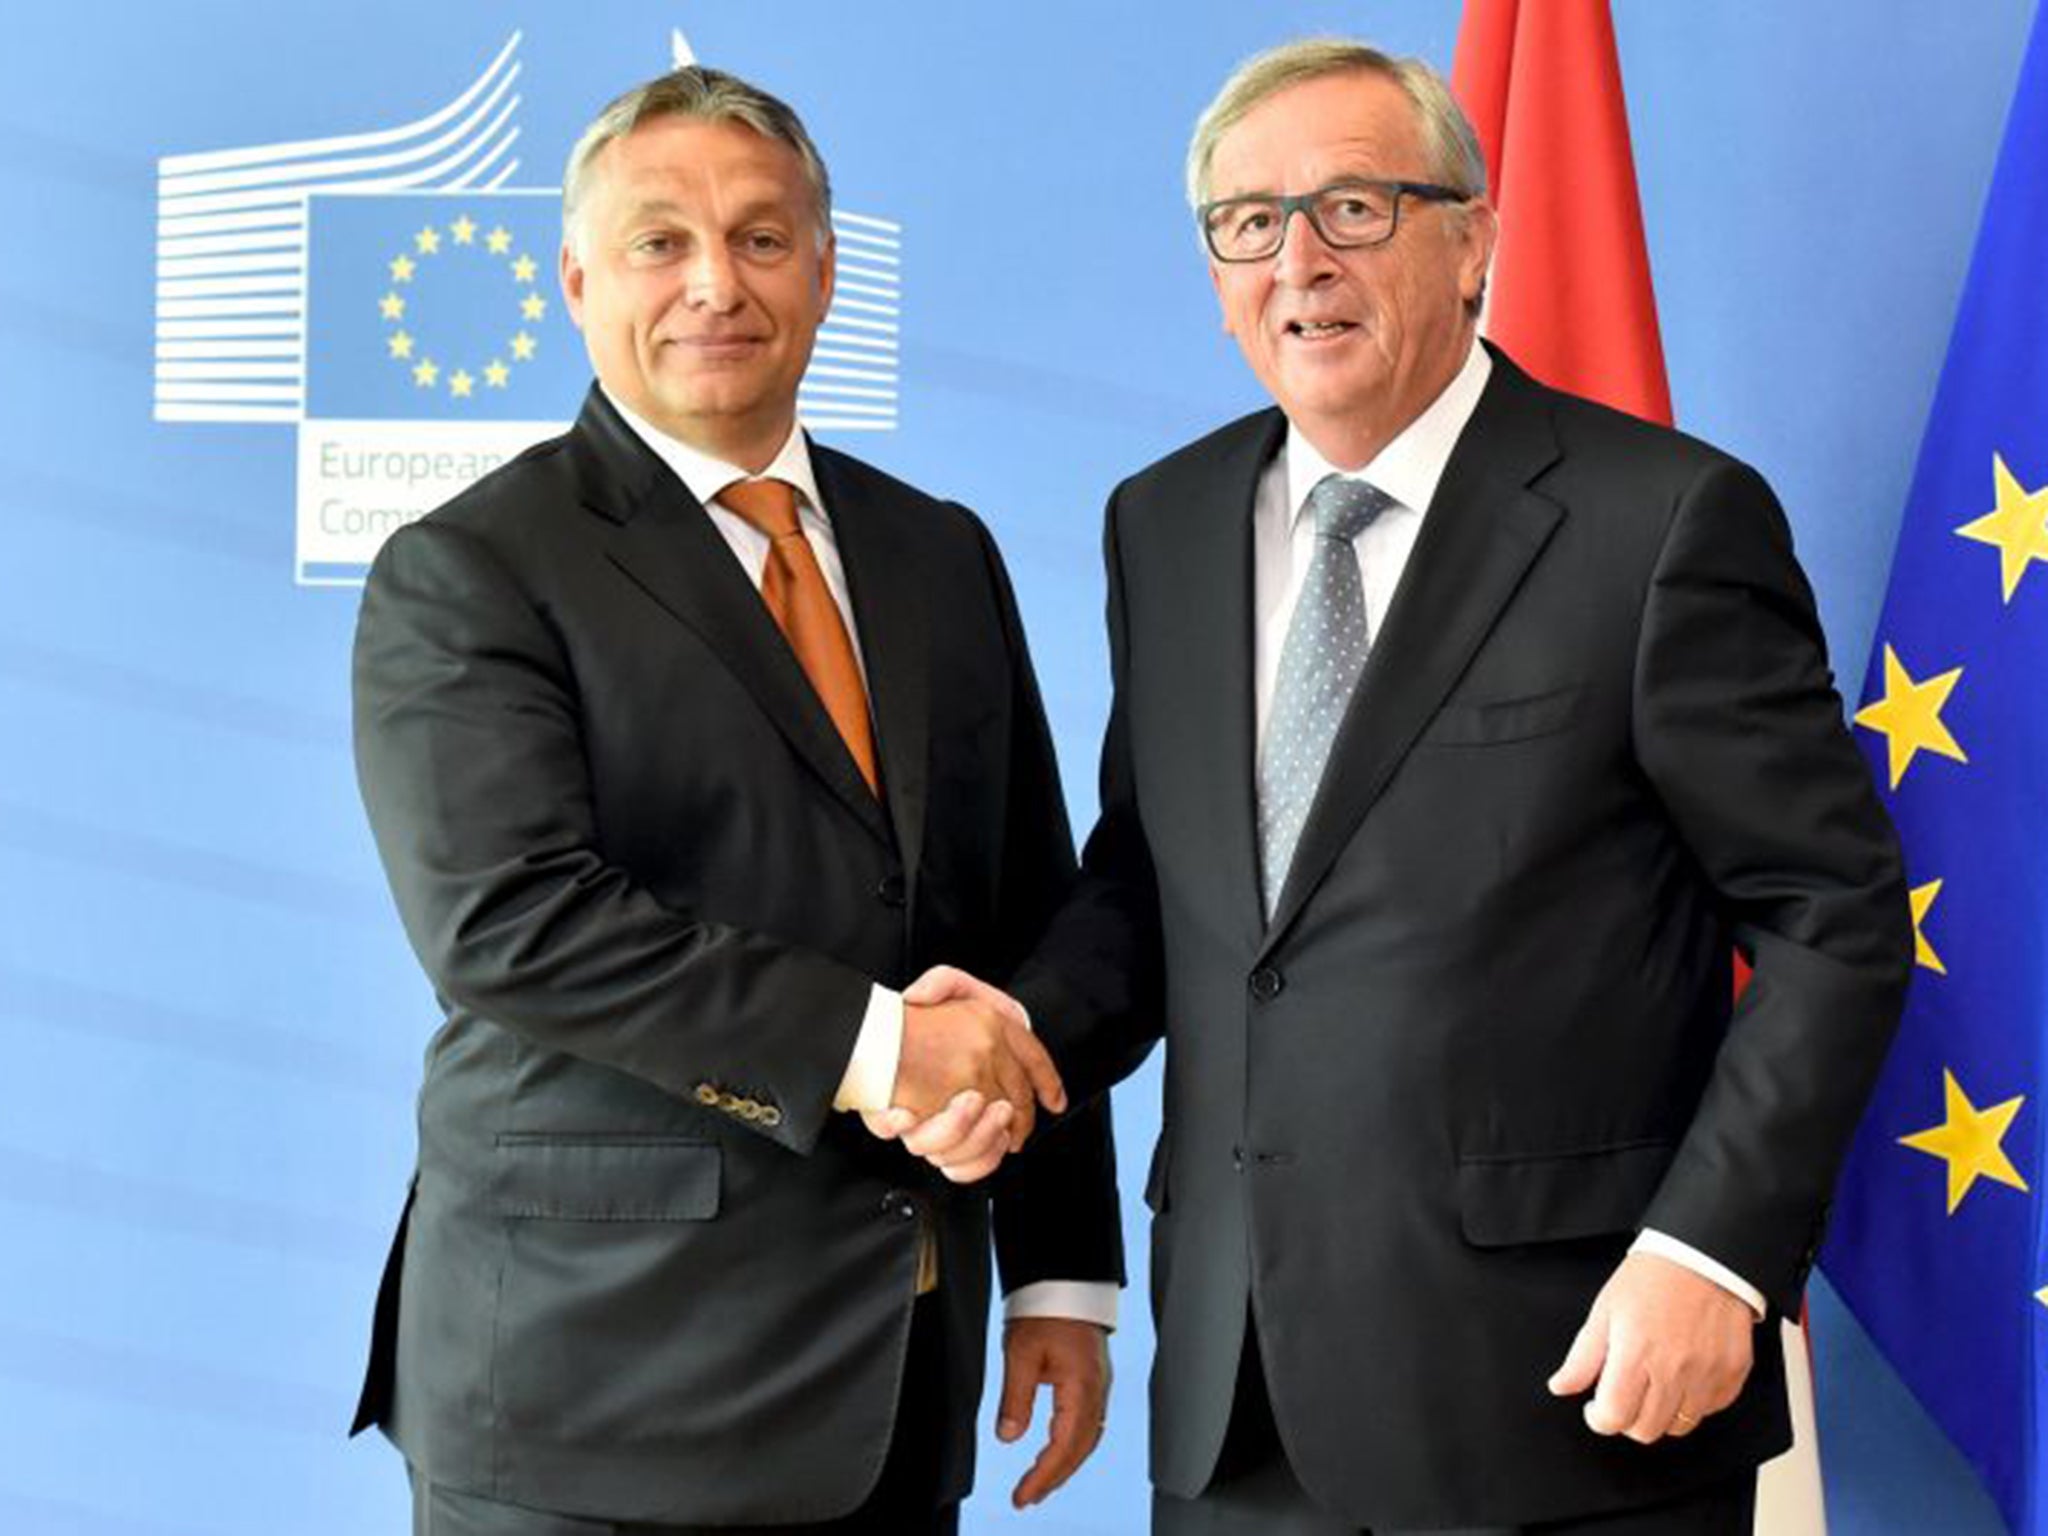 Hungary’s Prime Minister Viktor Orban, left; with Jean-Claude Juncker, has threatened to arrest refugees in his country illegally